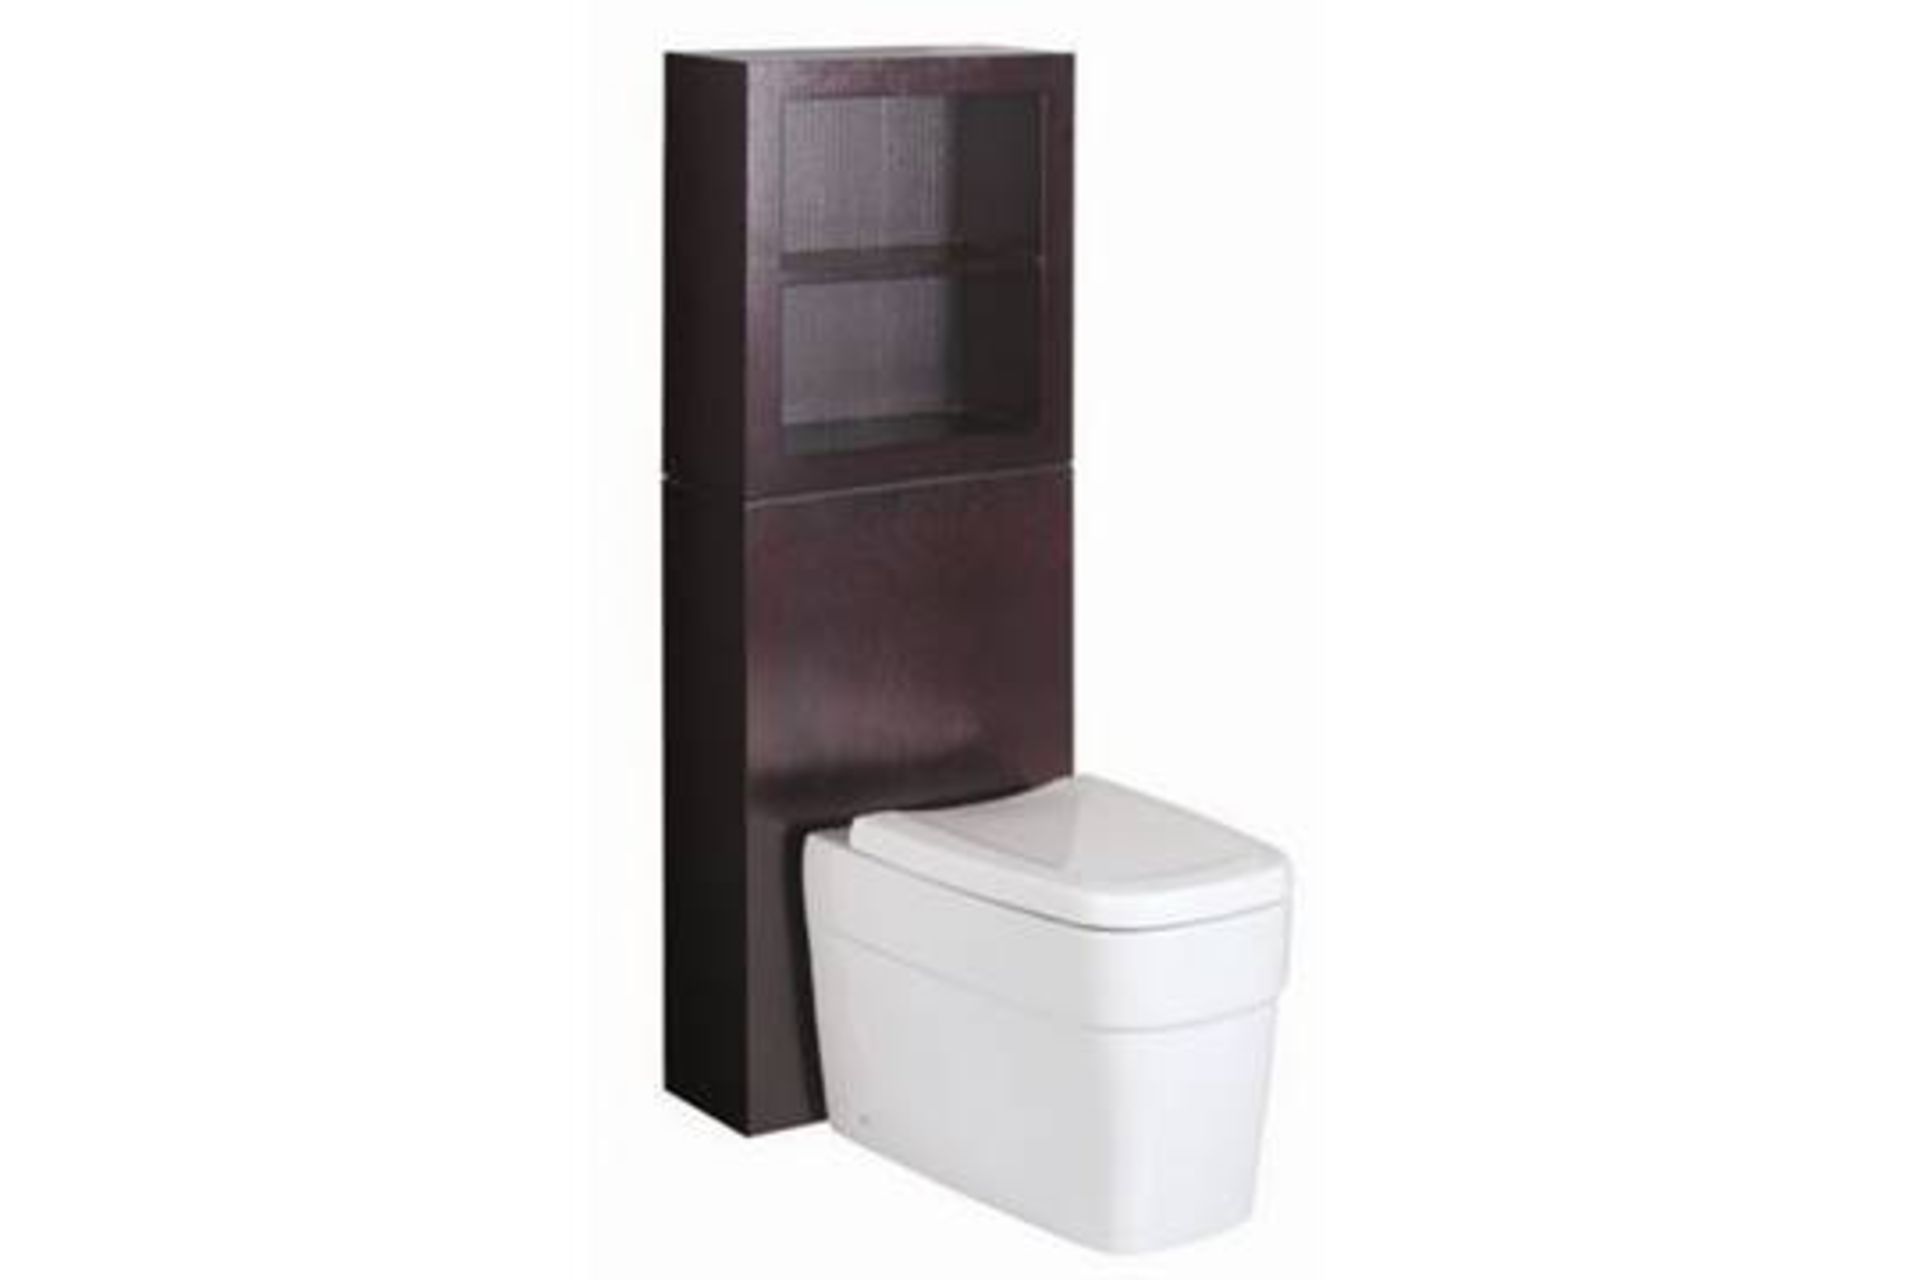 1 x Vogue ARC Series 2 Back to Wall TOILET PAN CISTERN UNIT With Additional TOP SHELF Unit - LIGHT - Image 2 of 2